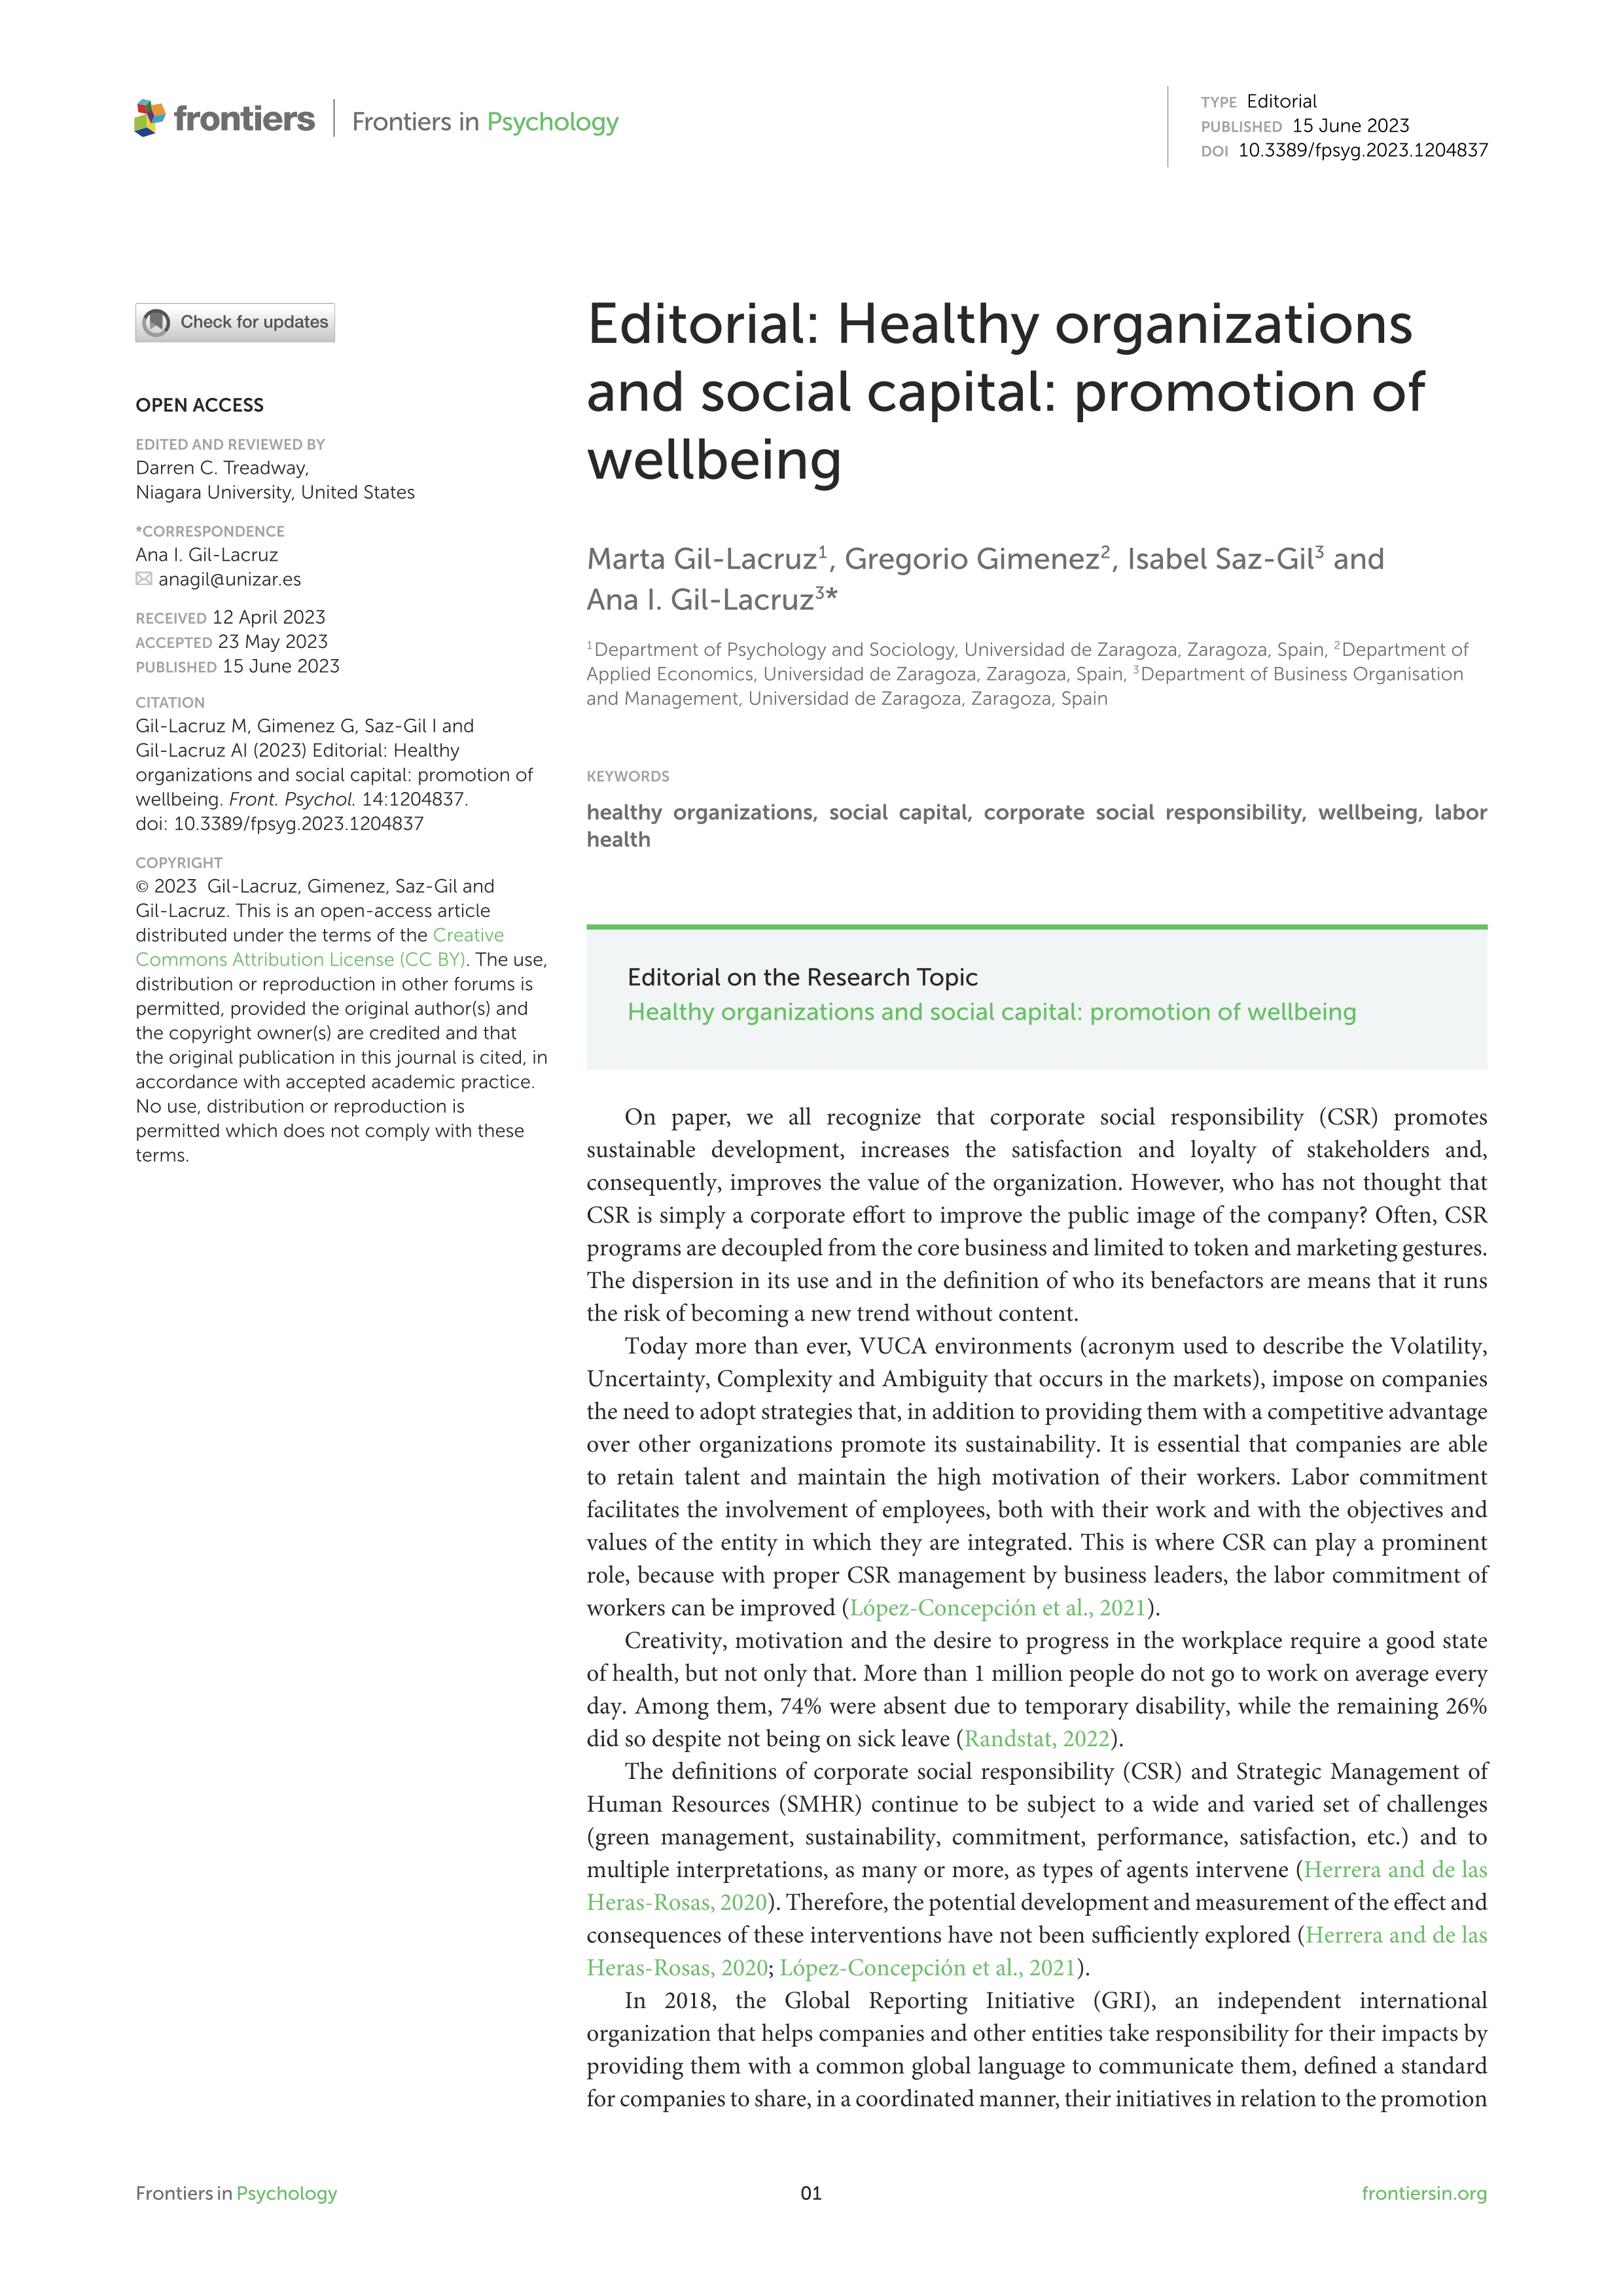 Healthy organizations and social capital: promotion of wellbeing